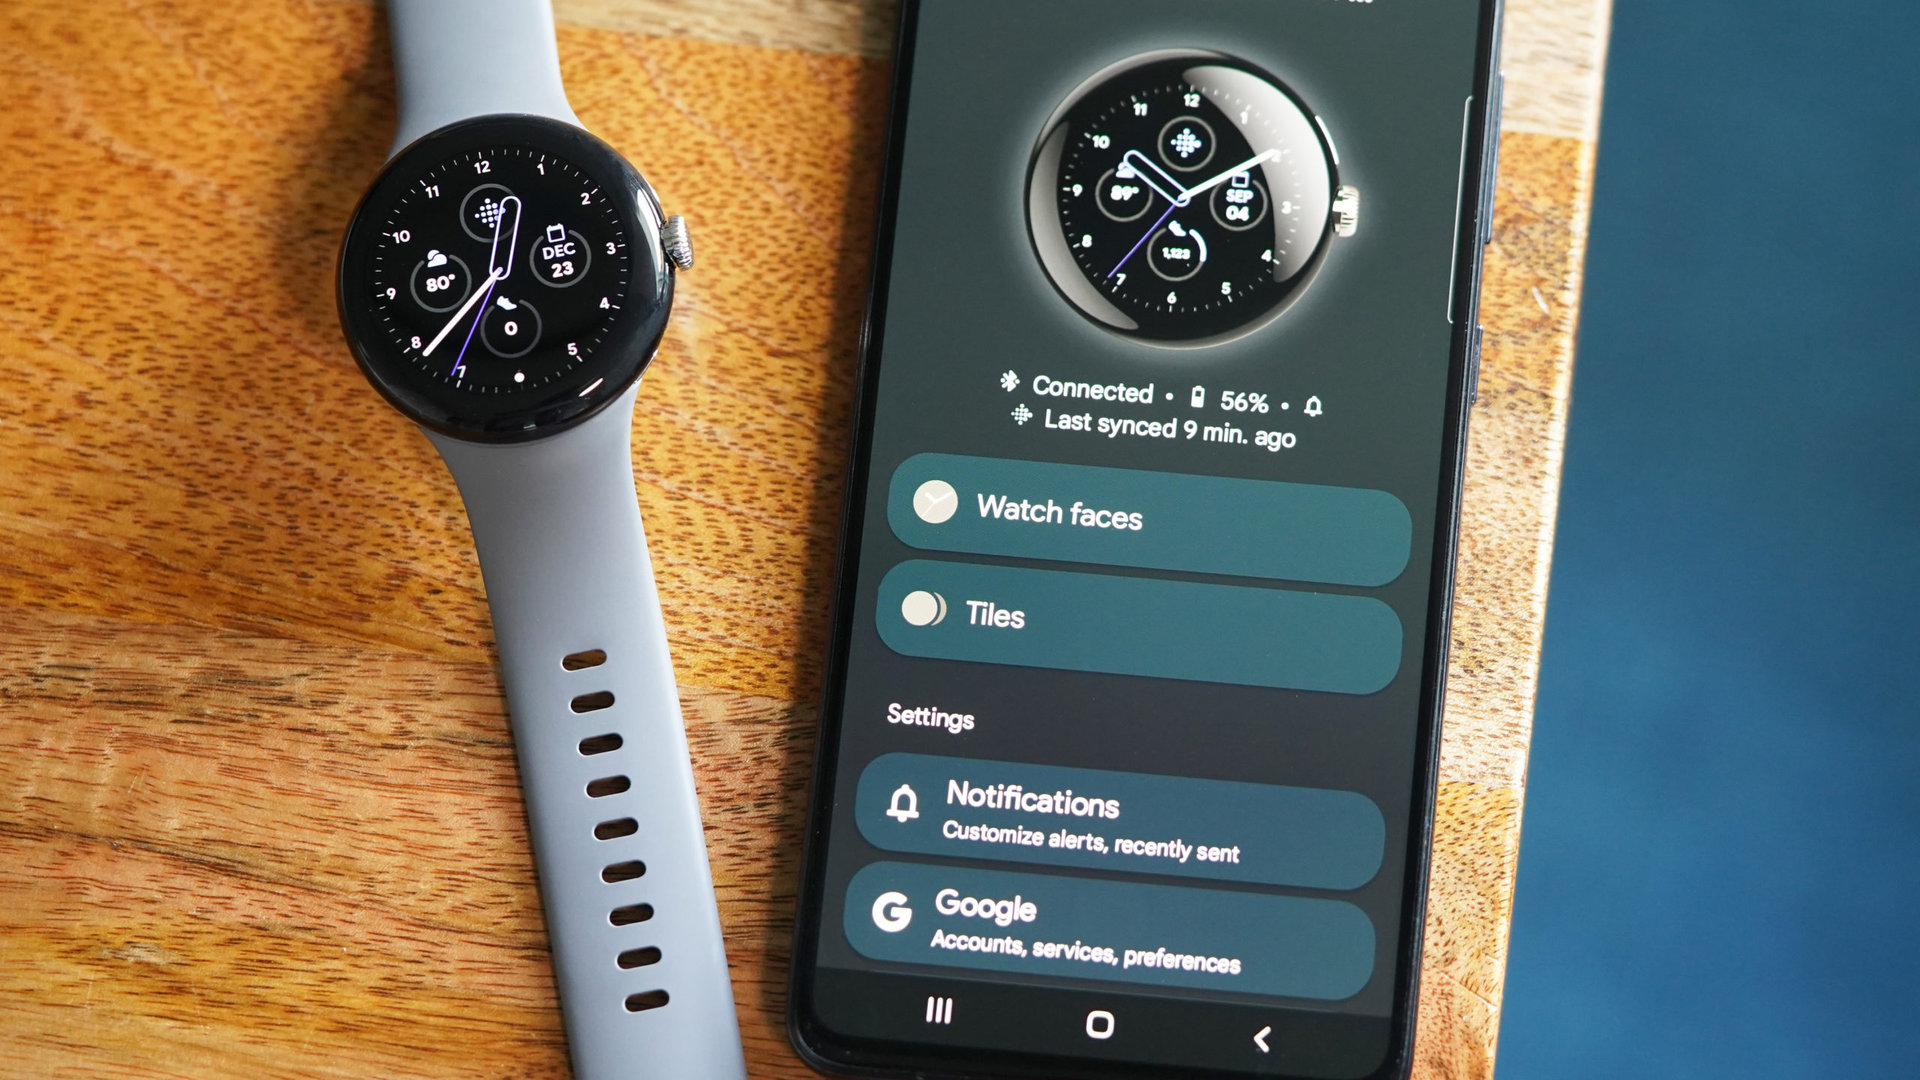 The Galaxy A51 displays the home screen of the Pixel Watch app.